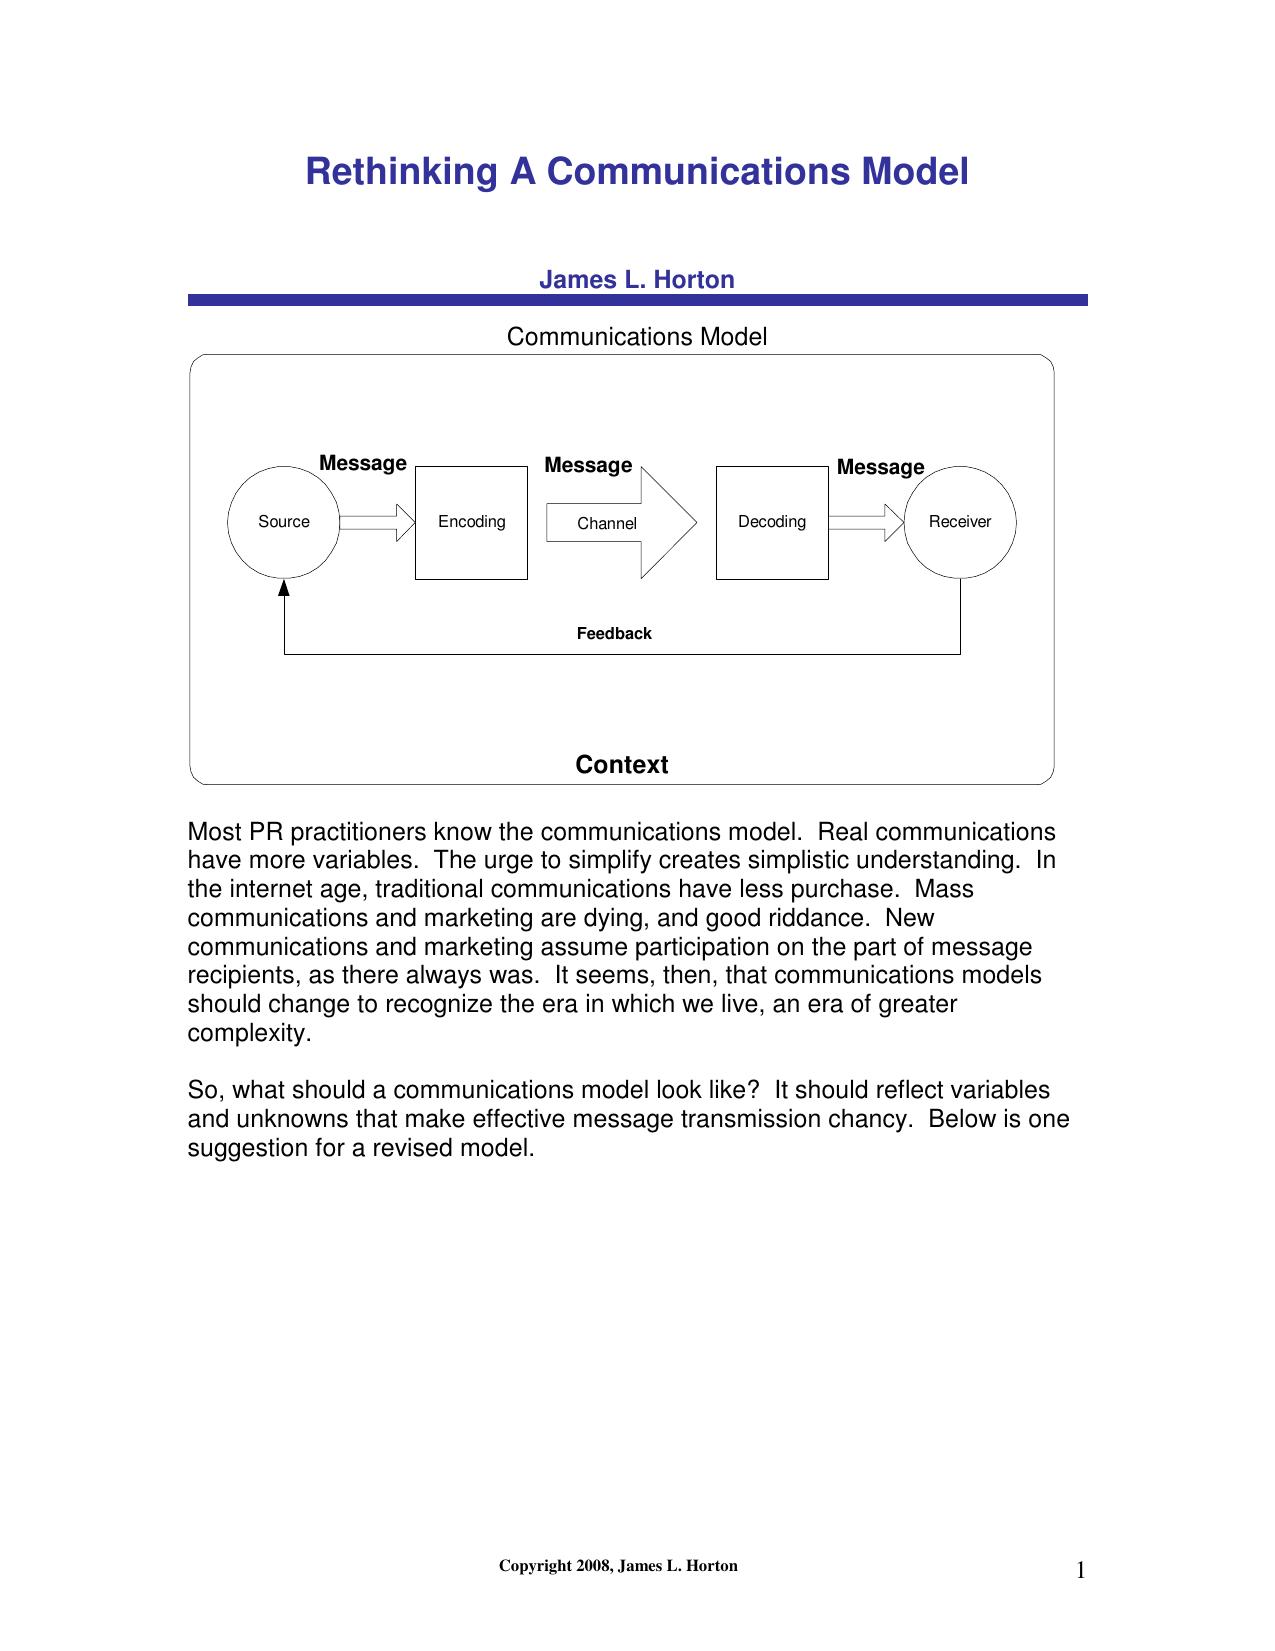 Microsoft Word - Rethinking the communications diagram - article.doc